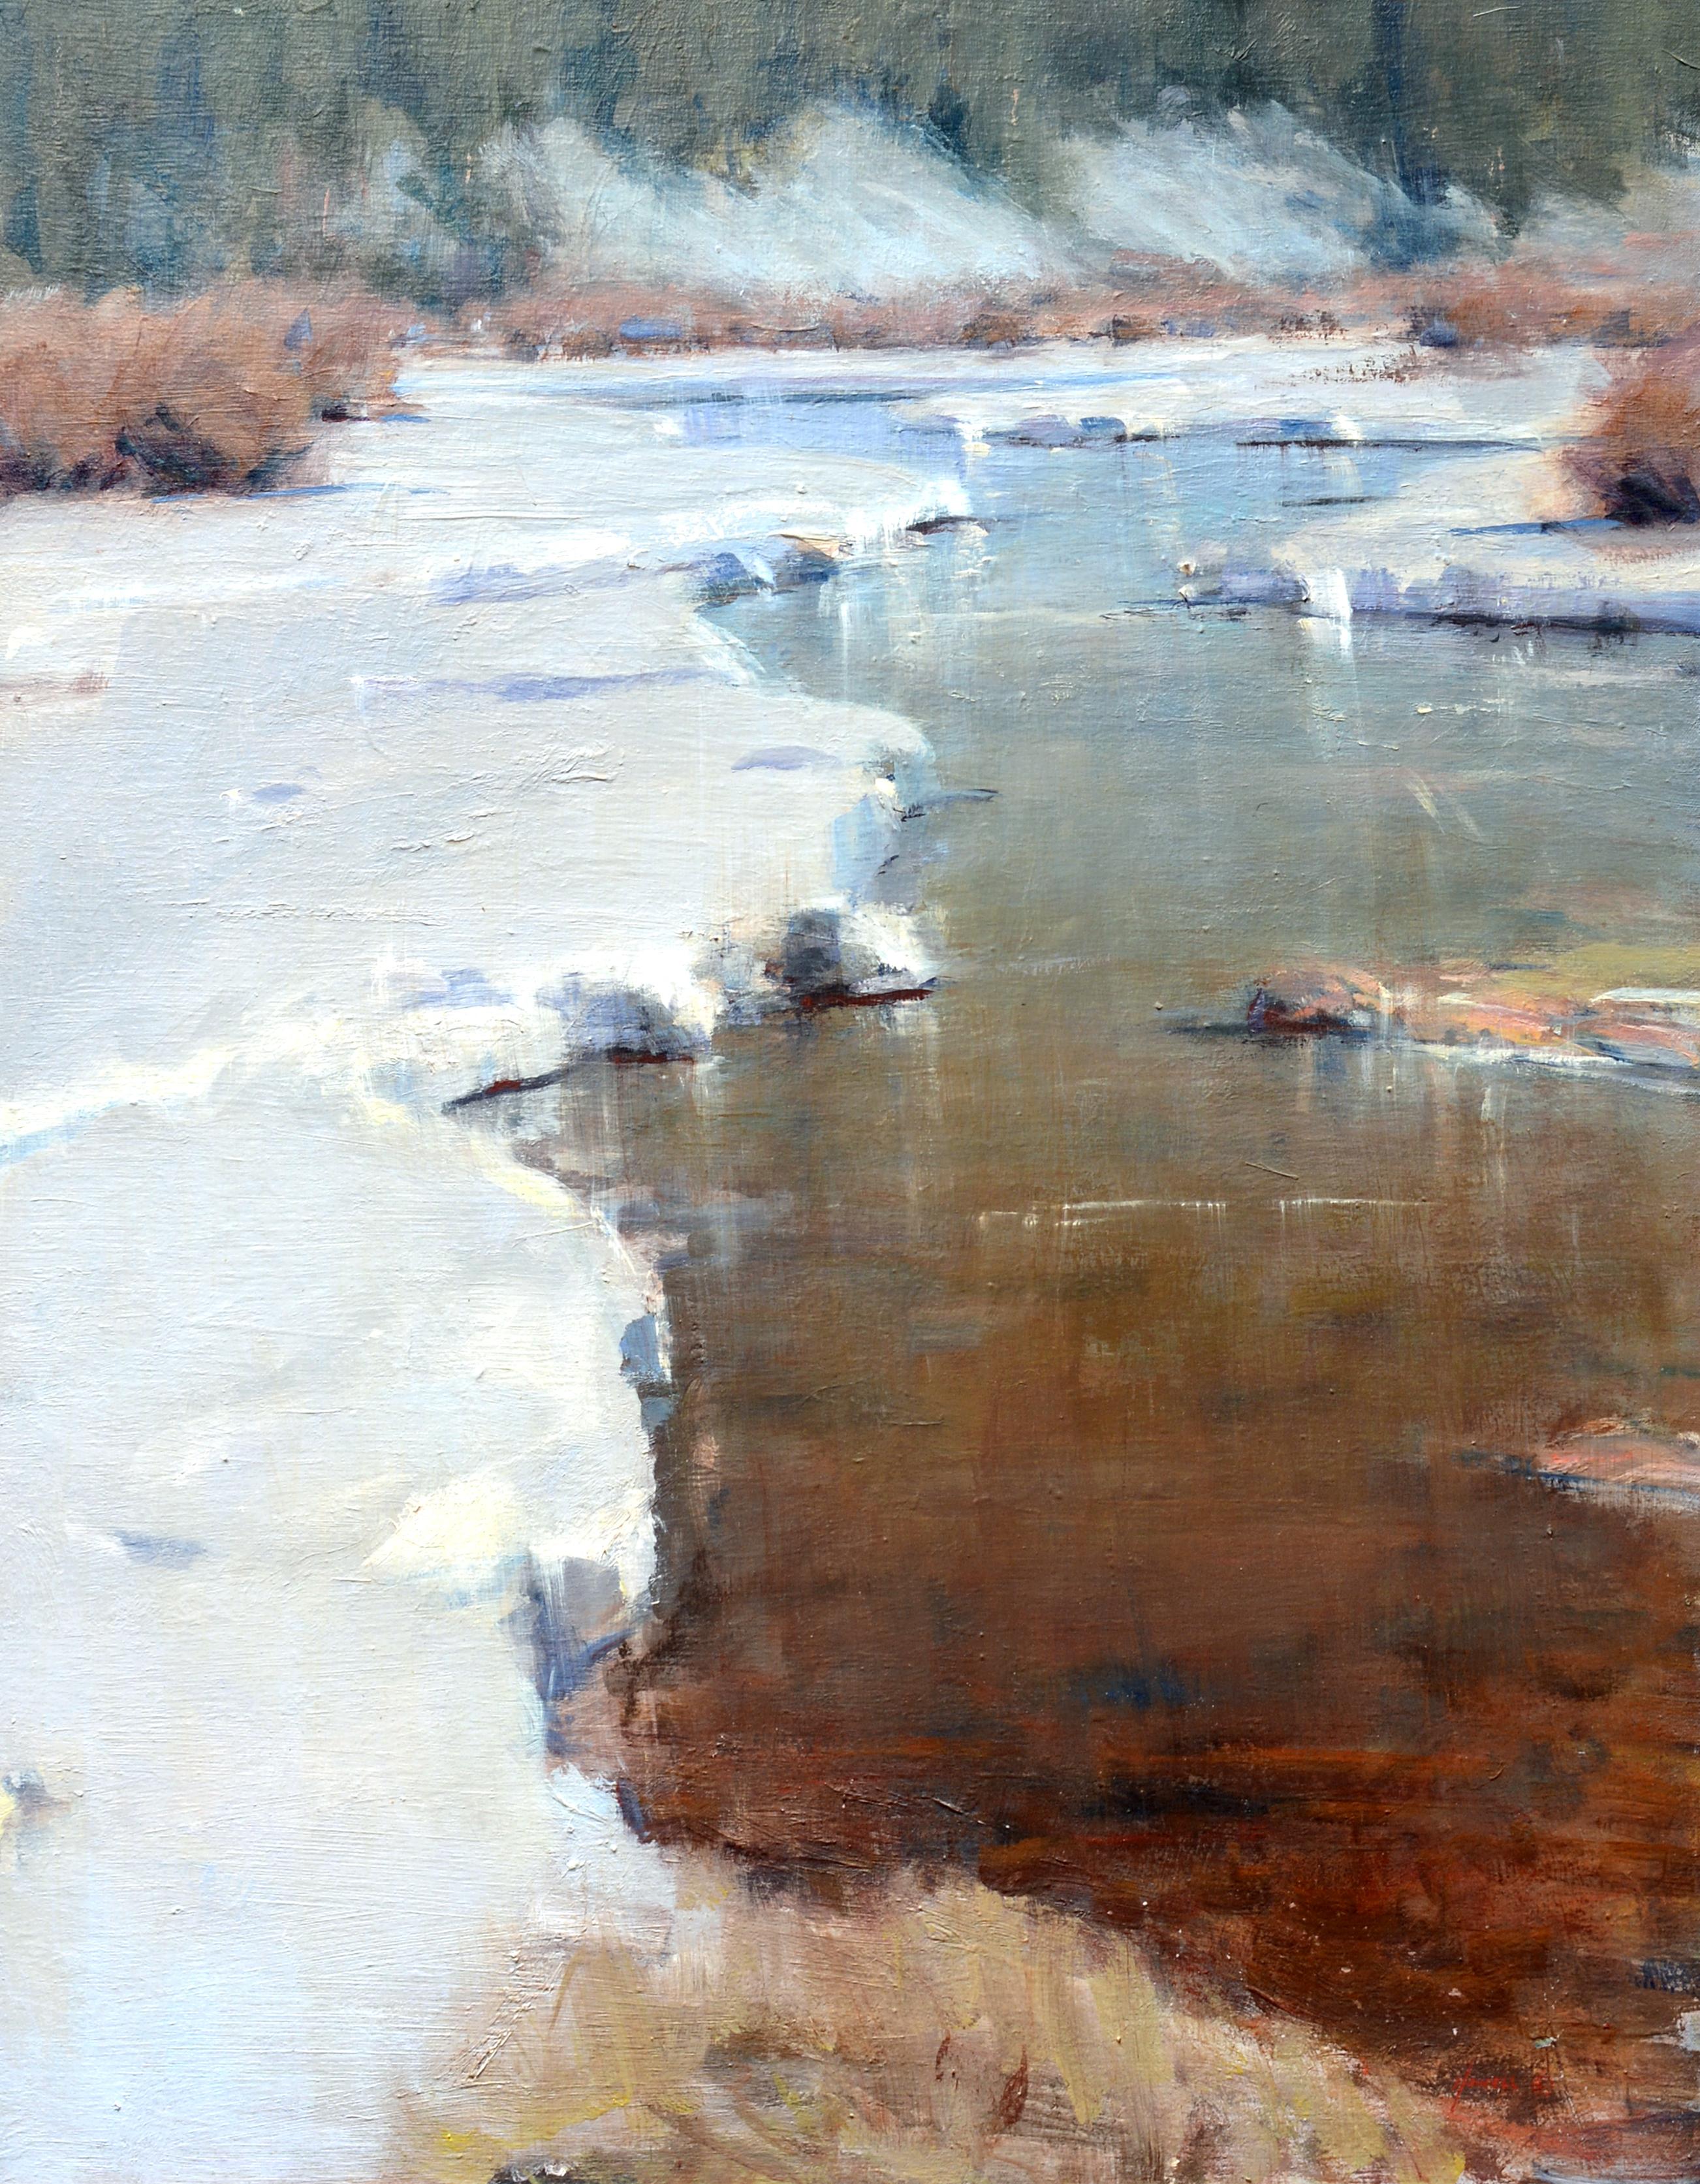 Rick Howell Landscape Painting - "Icy River" Oil Painting